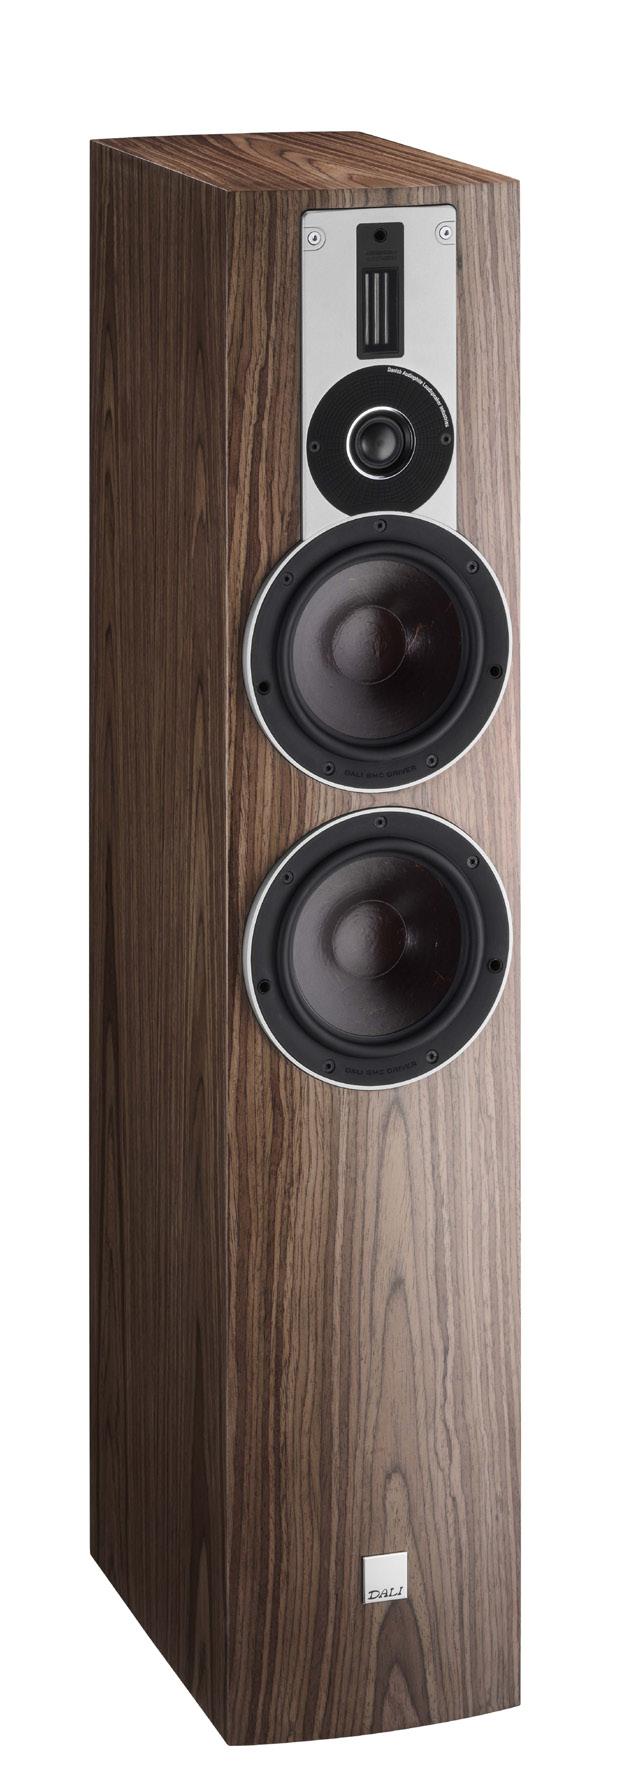 The RUBICON 5 is perfect for stereo listening or as the front speakers in a medium sized surround setup.